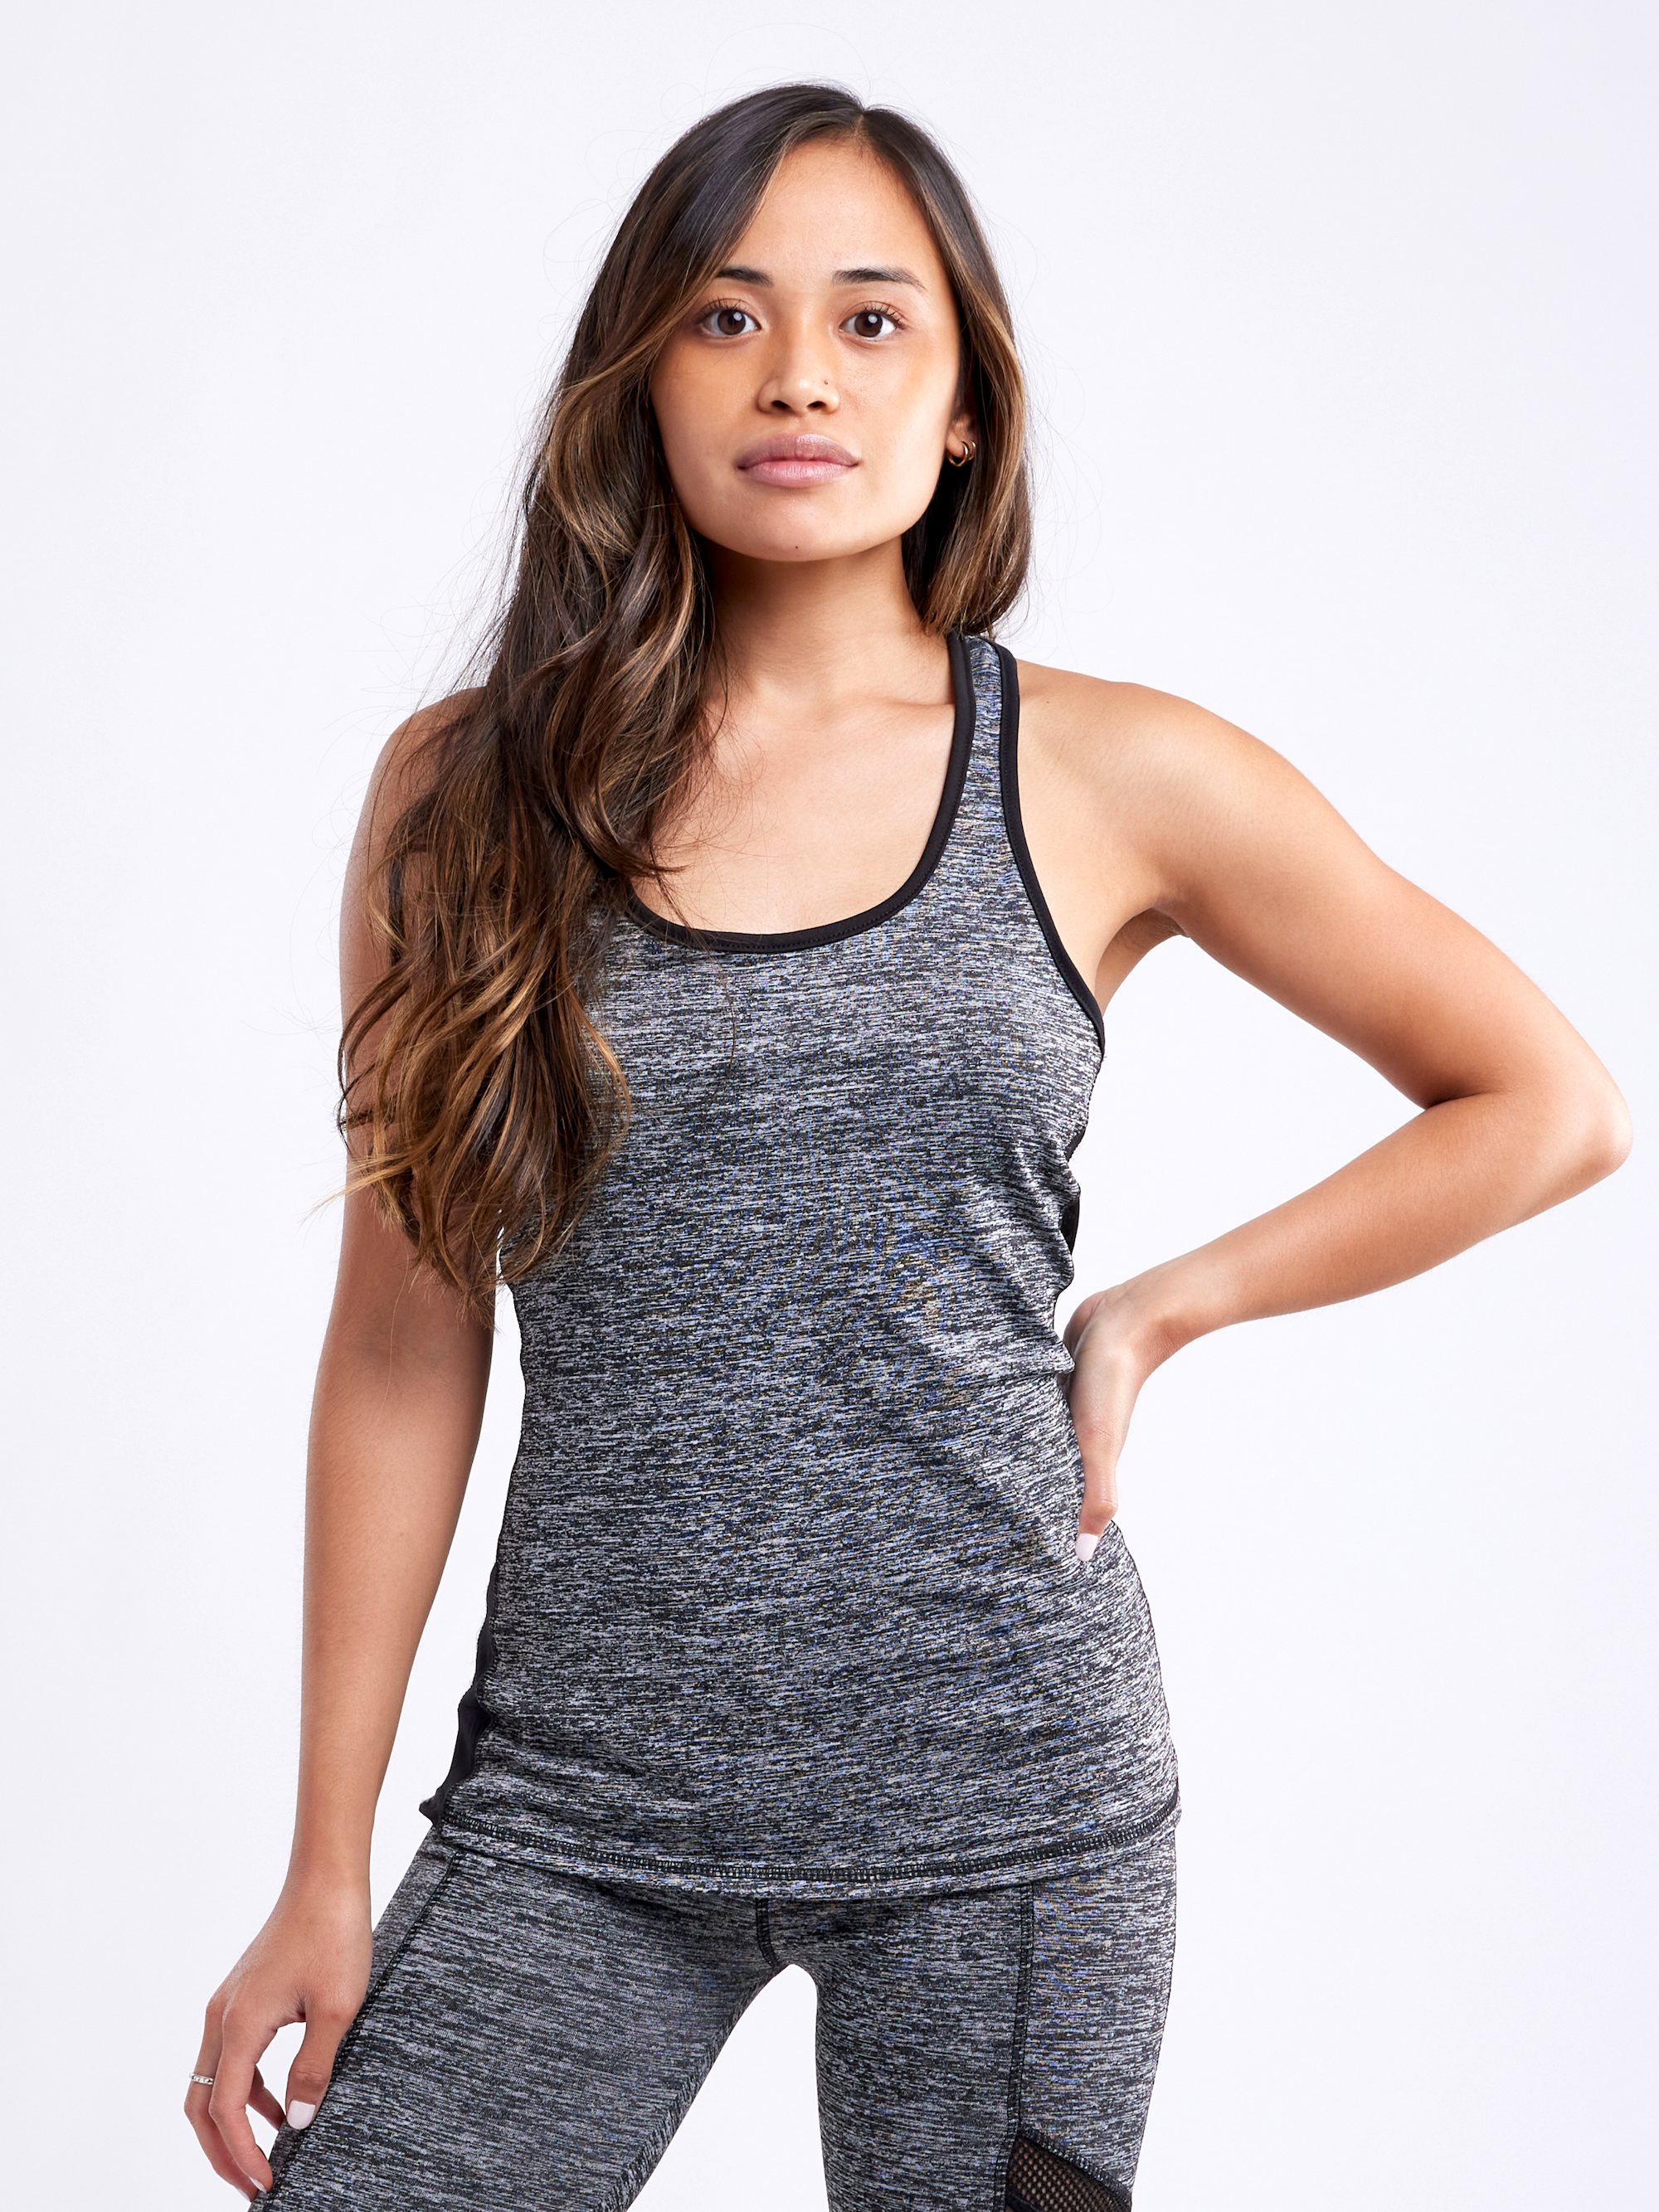 JUPITER GEAR Long Sports Tank Top with Side Mesh Panels